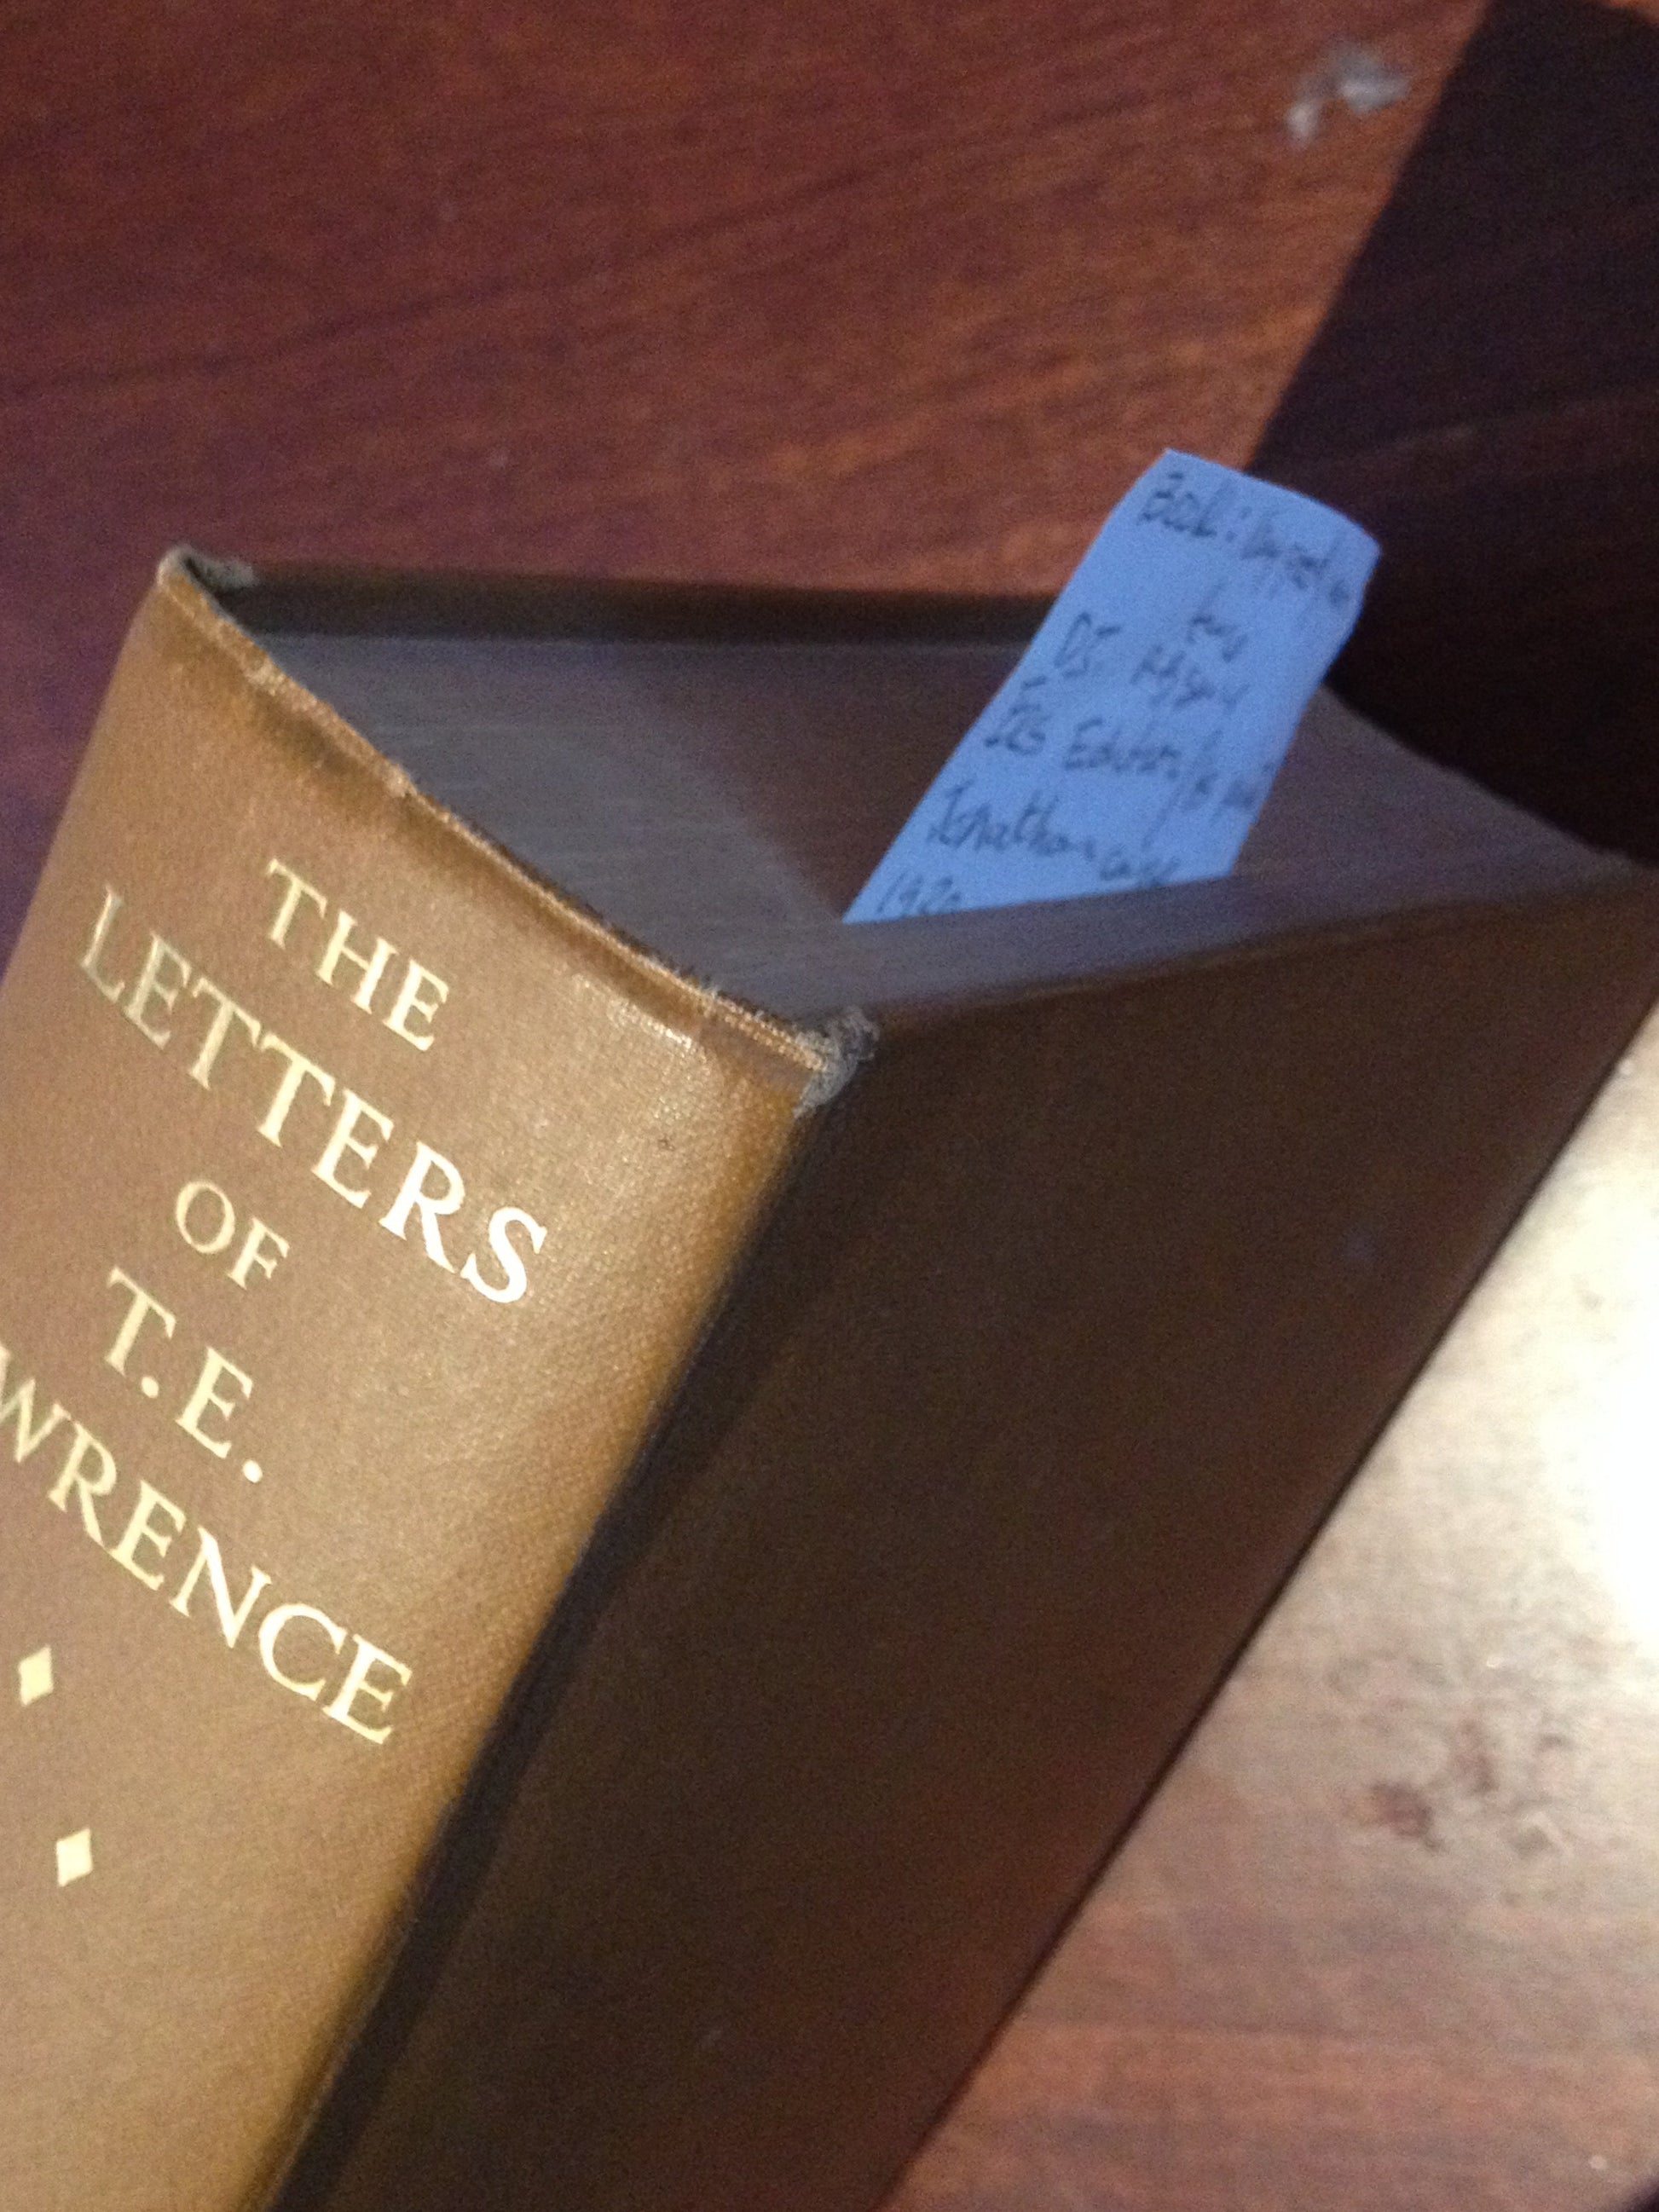 THE LETTERS OF TE LAWRENCE  EDITED BY: DAVID GARNETT BooksCardsNBikes